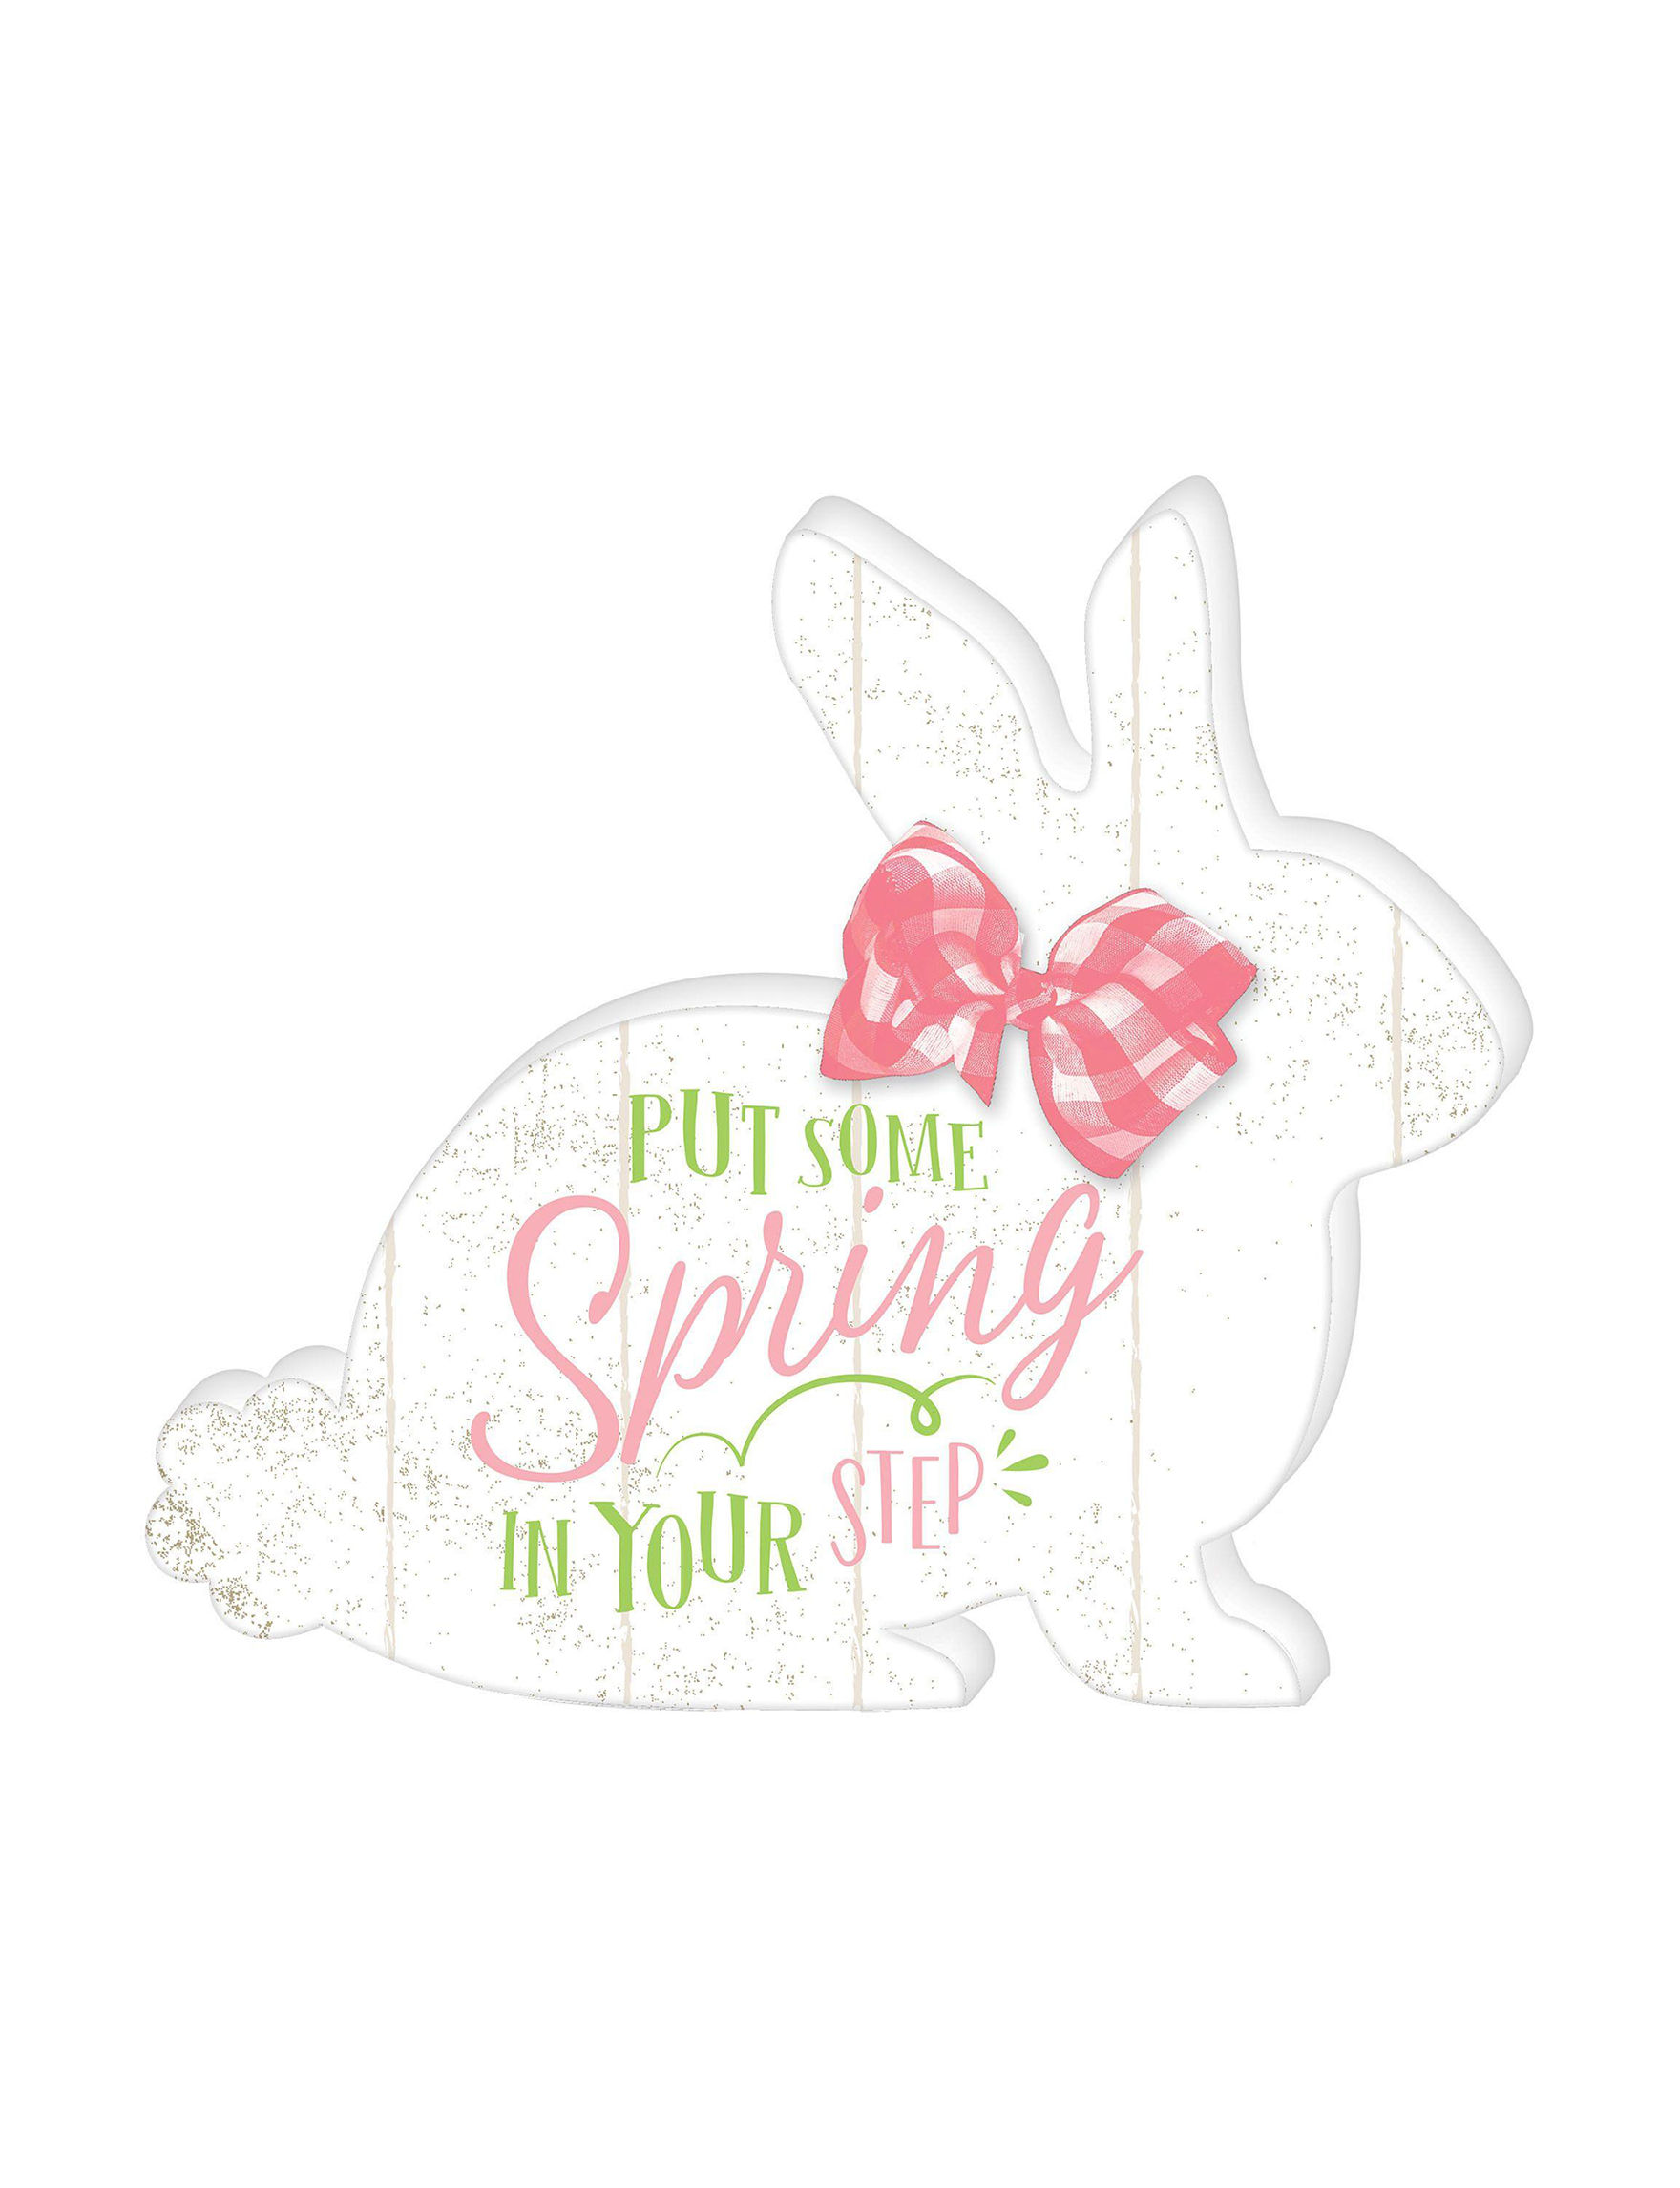 UPC 192937000717 product image for Amscan 3-pk. Spring Step Bunny Standing Plaque - White / Multi - Amscan | upcitemdb.com